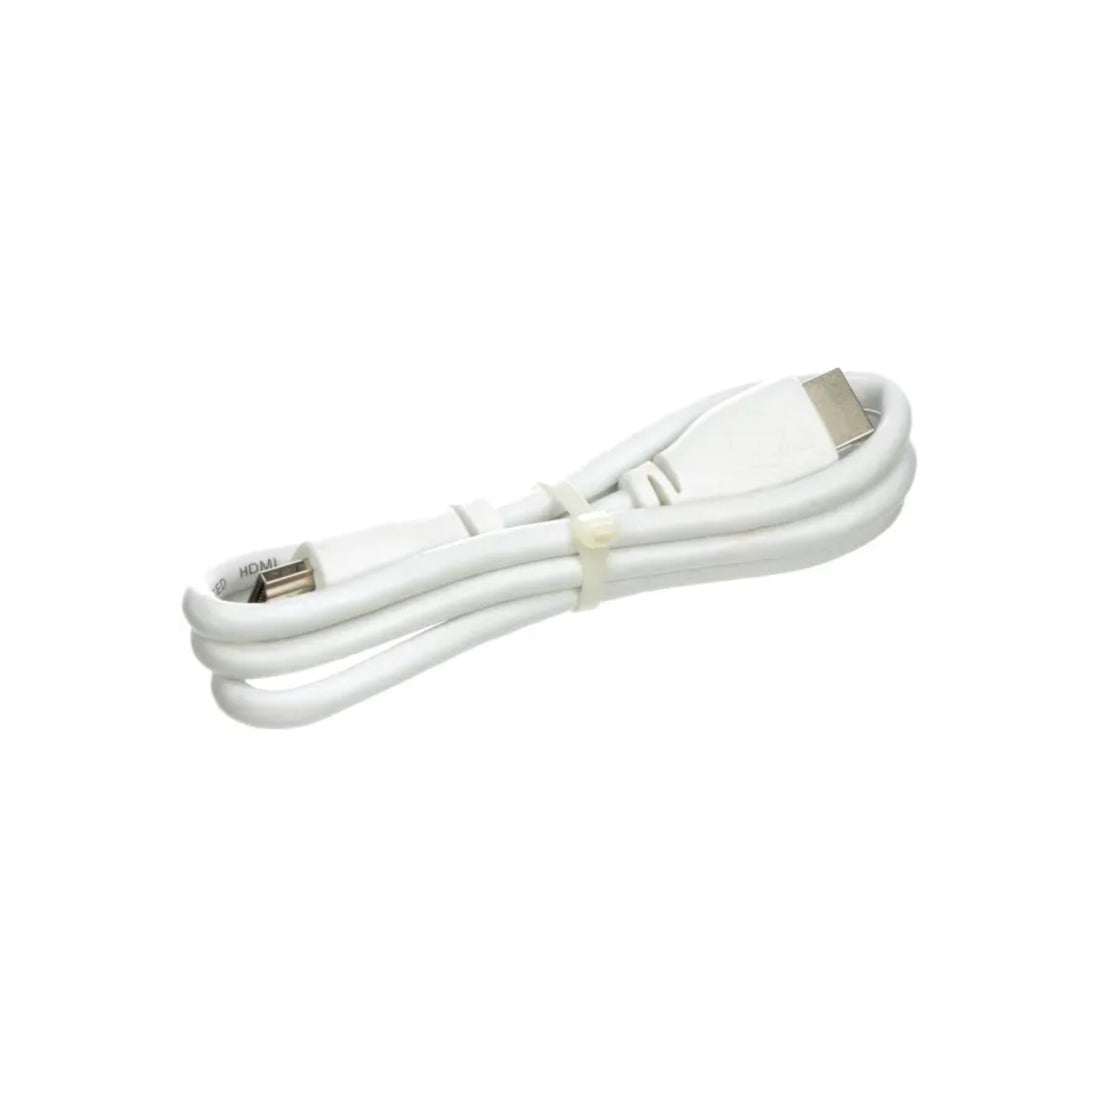 Official Raspberry Pi 1m HDMI Cable (White)